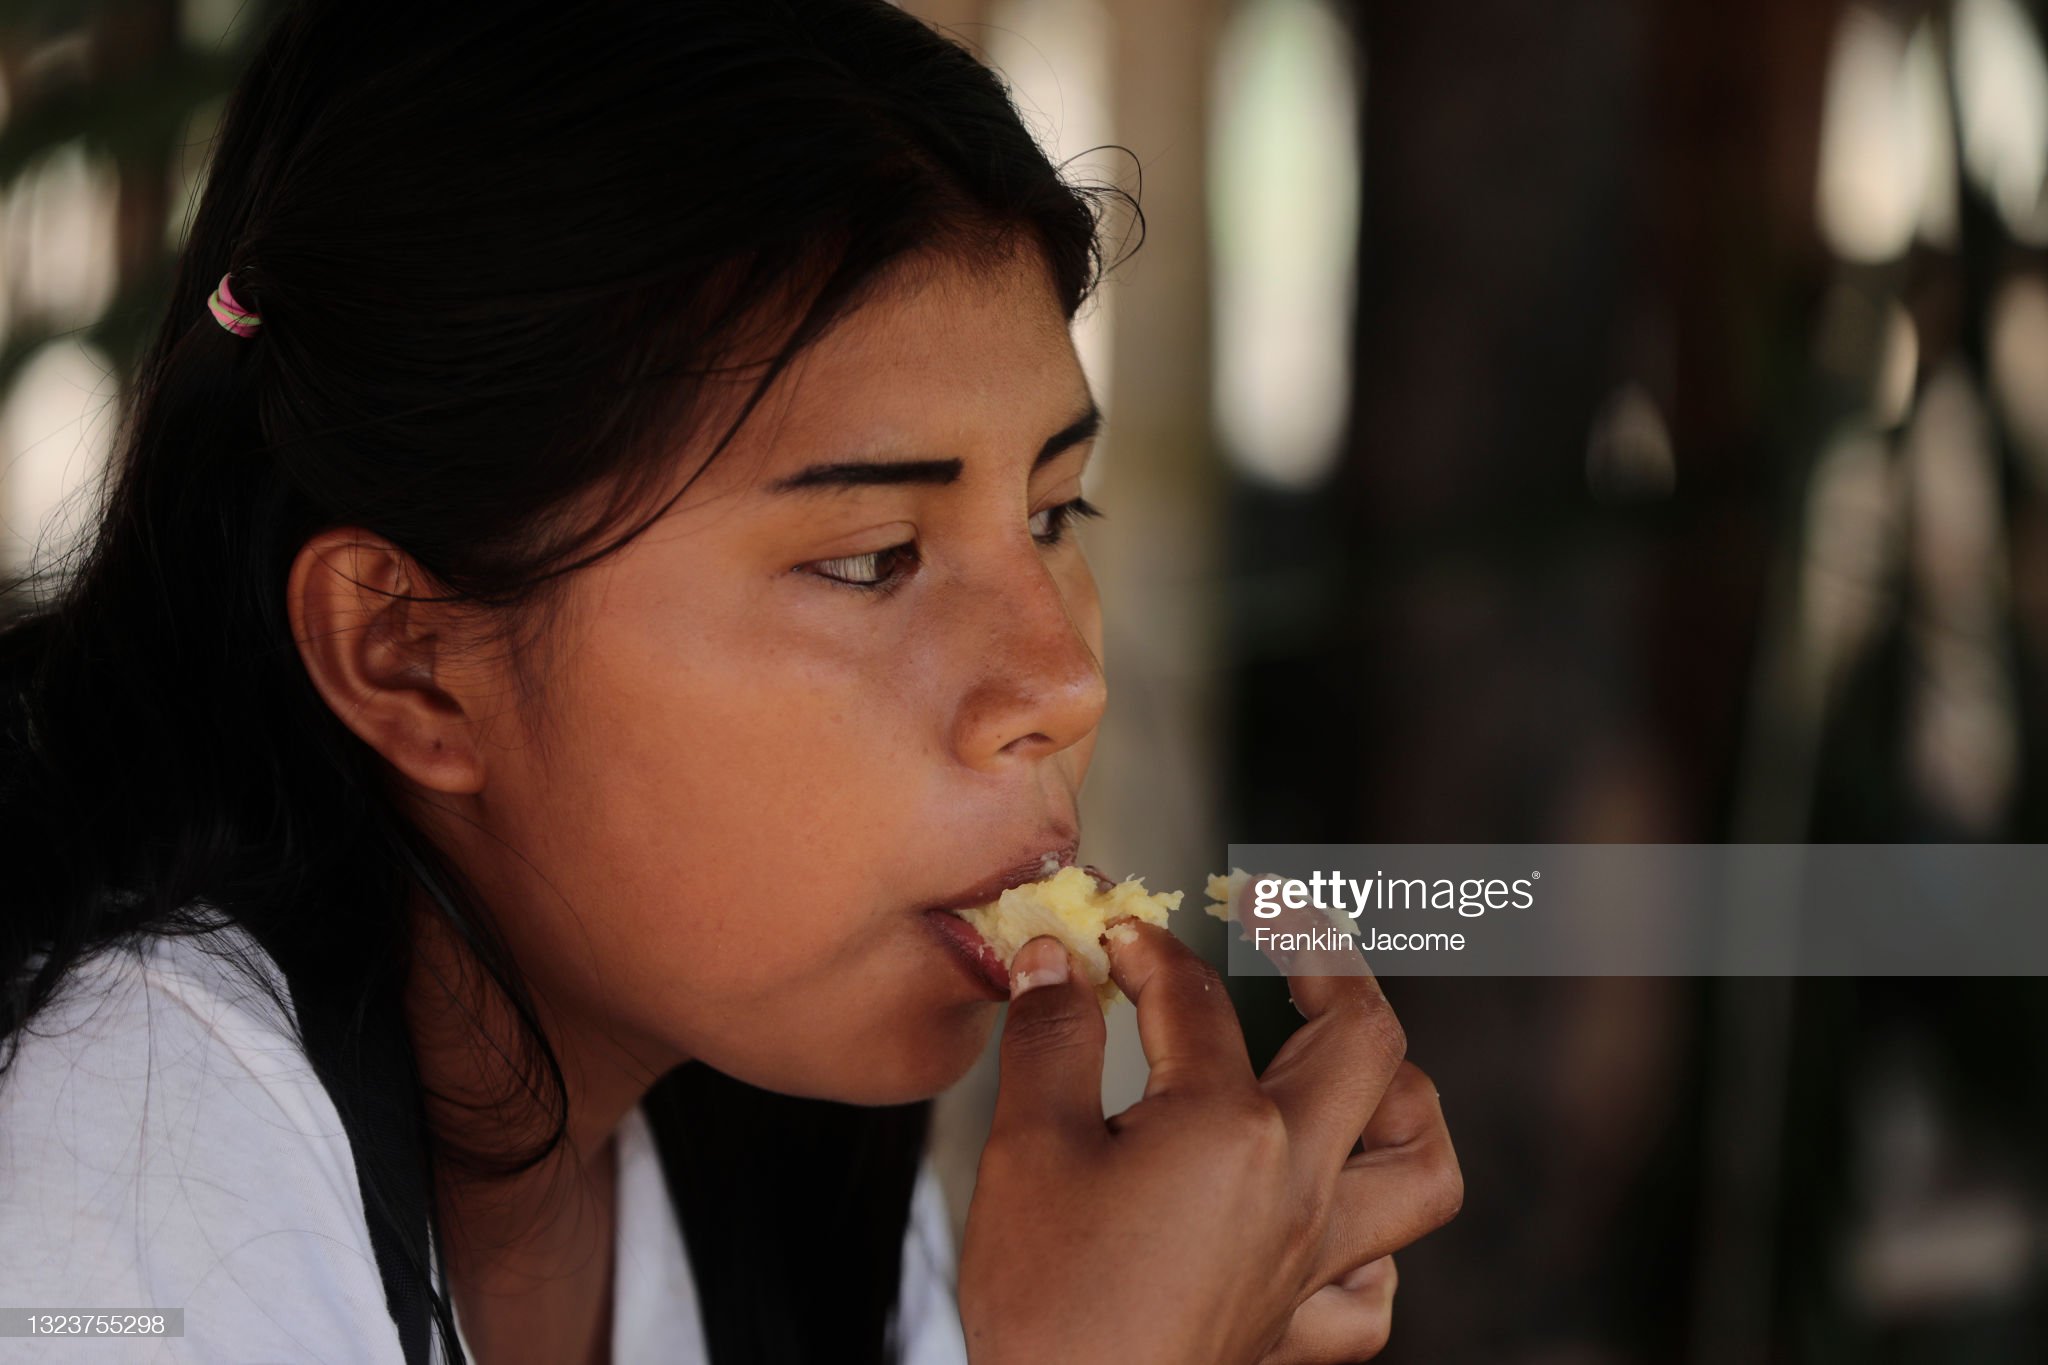 rosa-gualinga-chews-yucca-to-prepare-the-traditional-chewed-chicha-picture-id1323755298